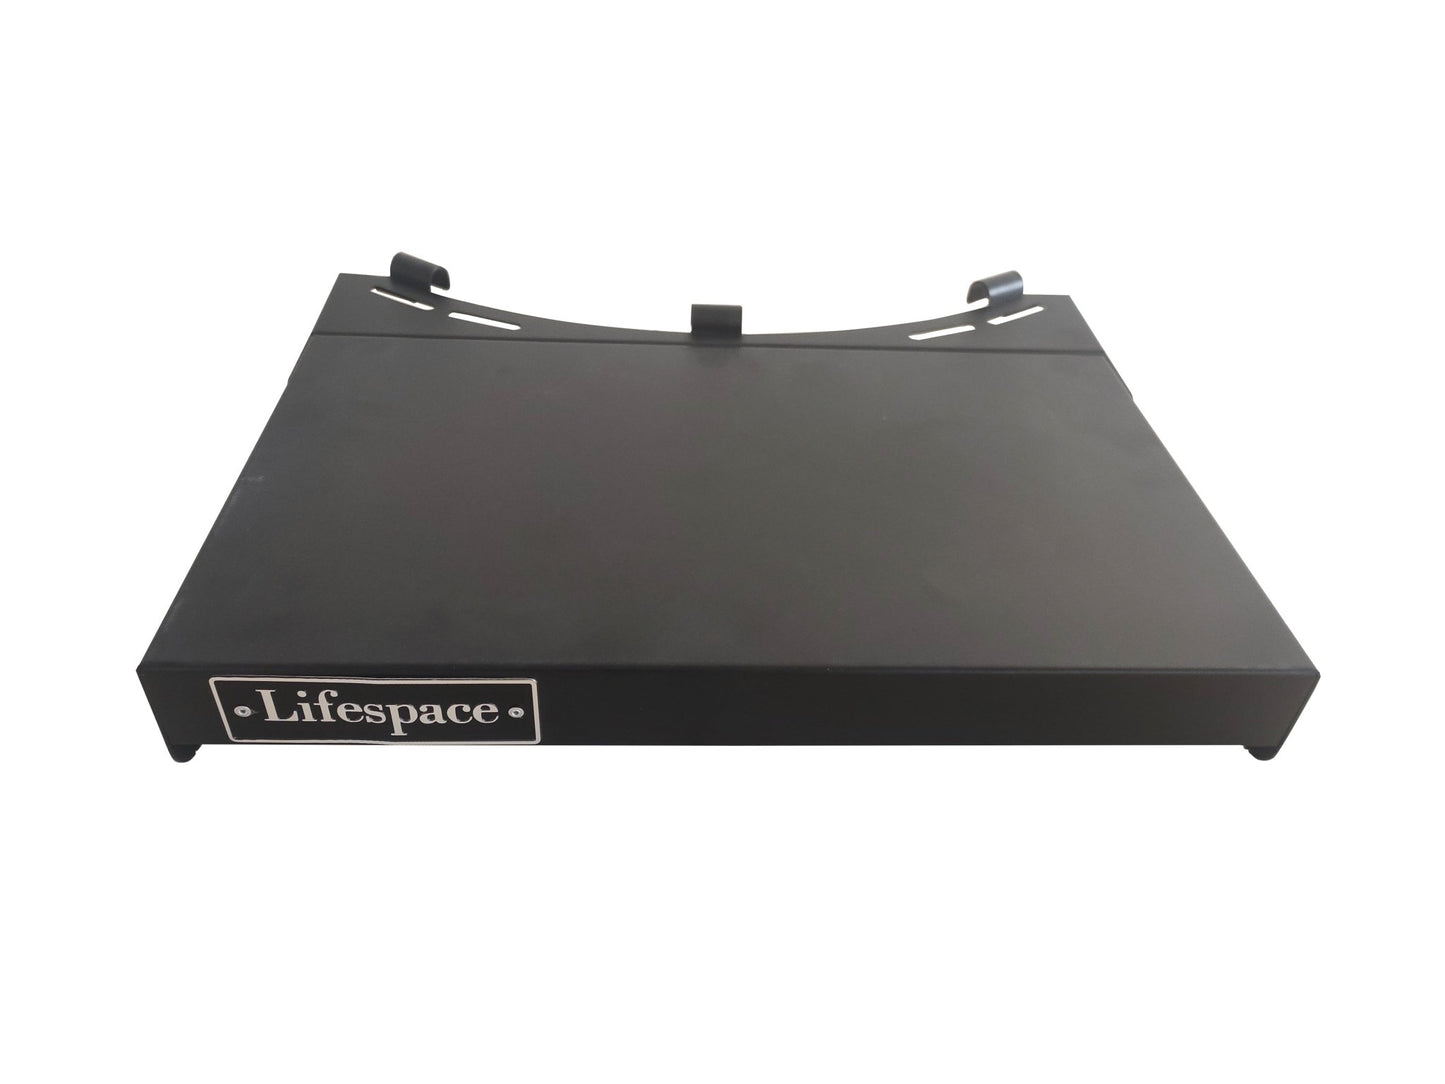 Lifespace Kettle Grill Folding Extension Table with Six Utility Hooks - Lifespace